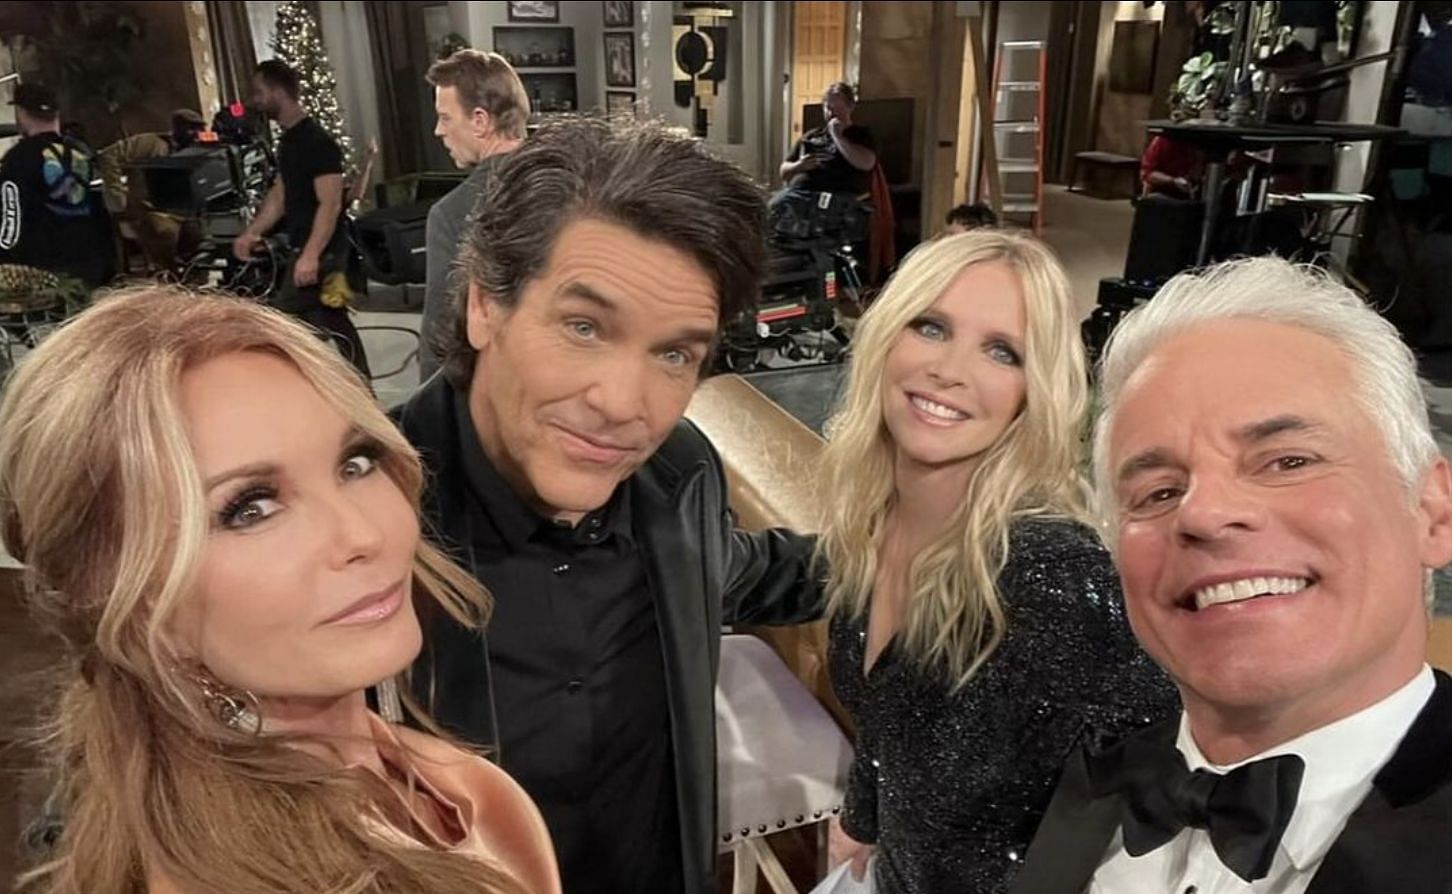 A still of the characters from The Young and the Restless. (Image via Instagram/@youngandrestlesscbs)